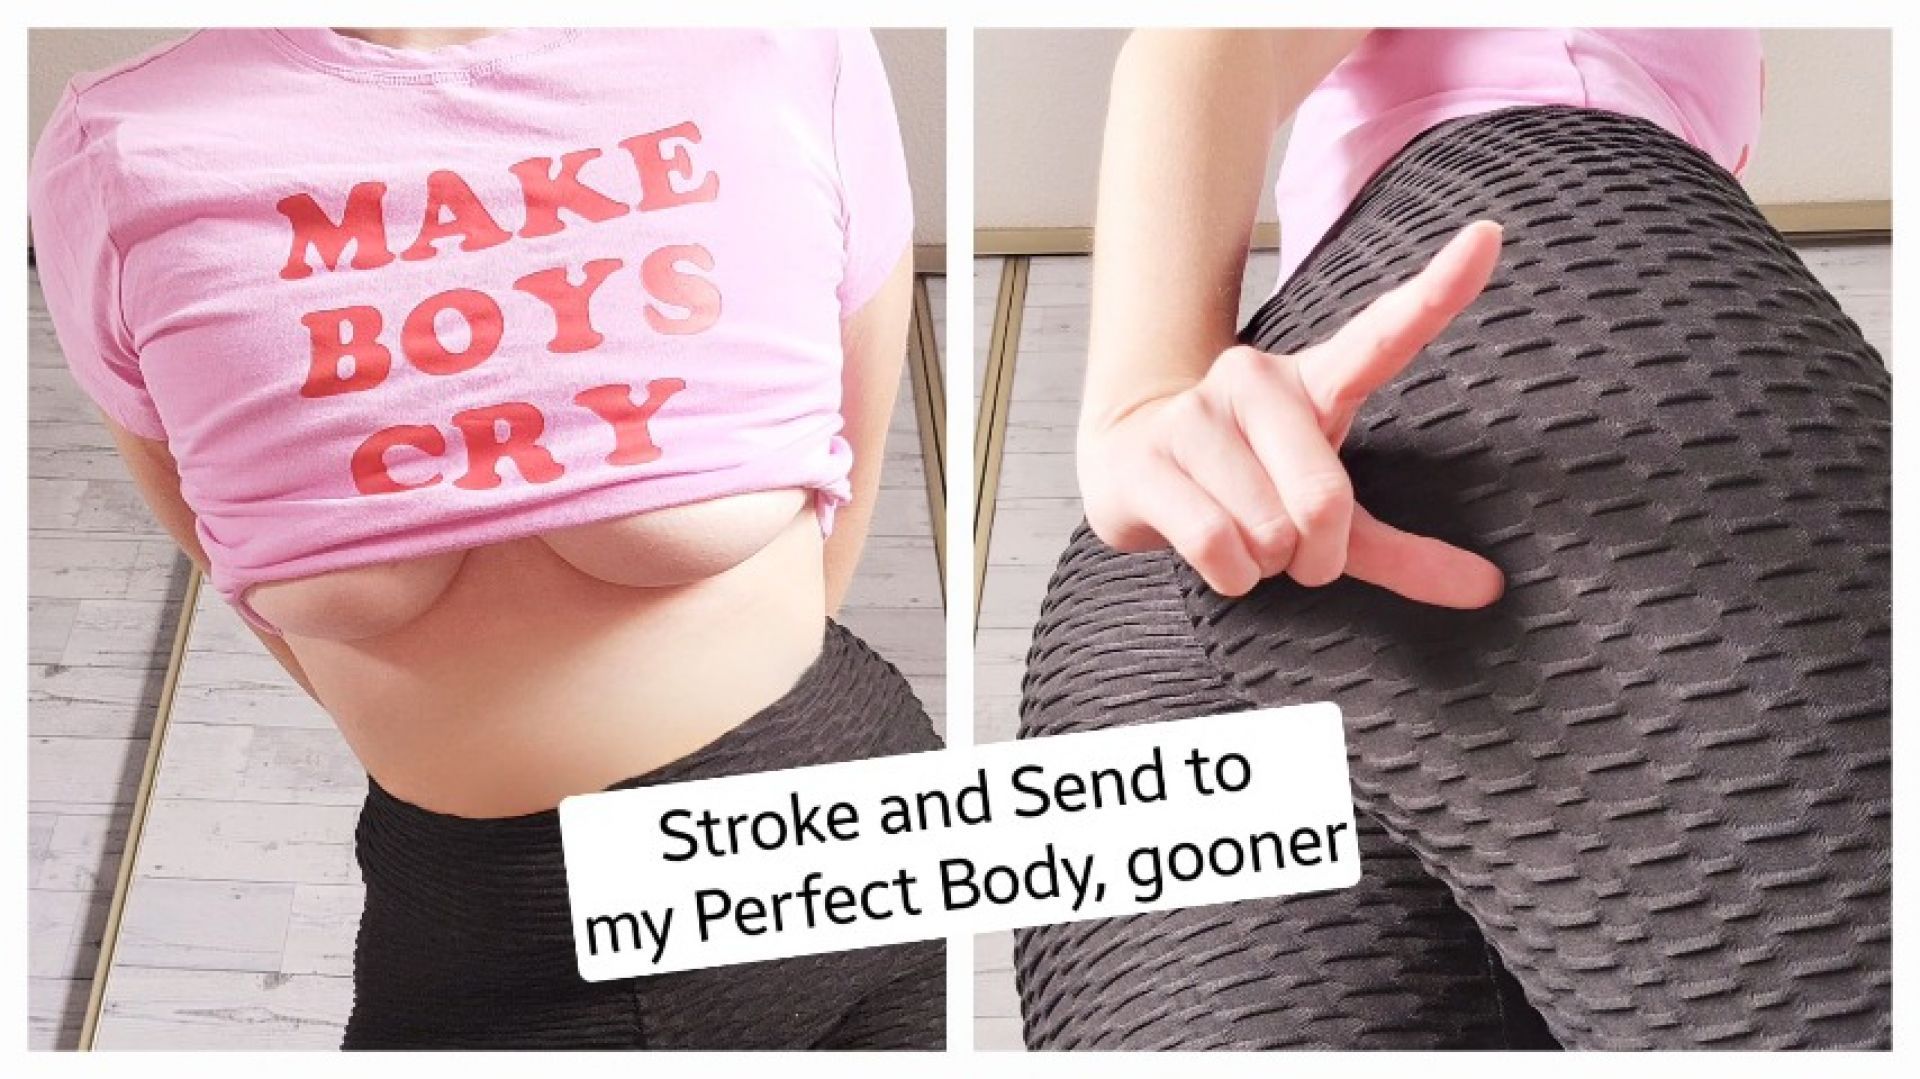 Stroke and Send to my Perfect Body, gooner